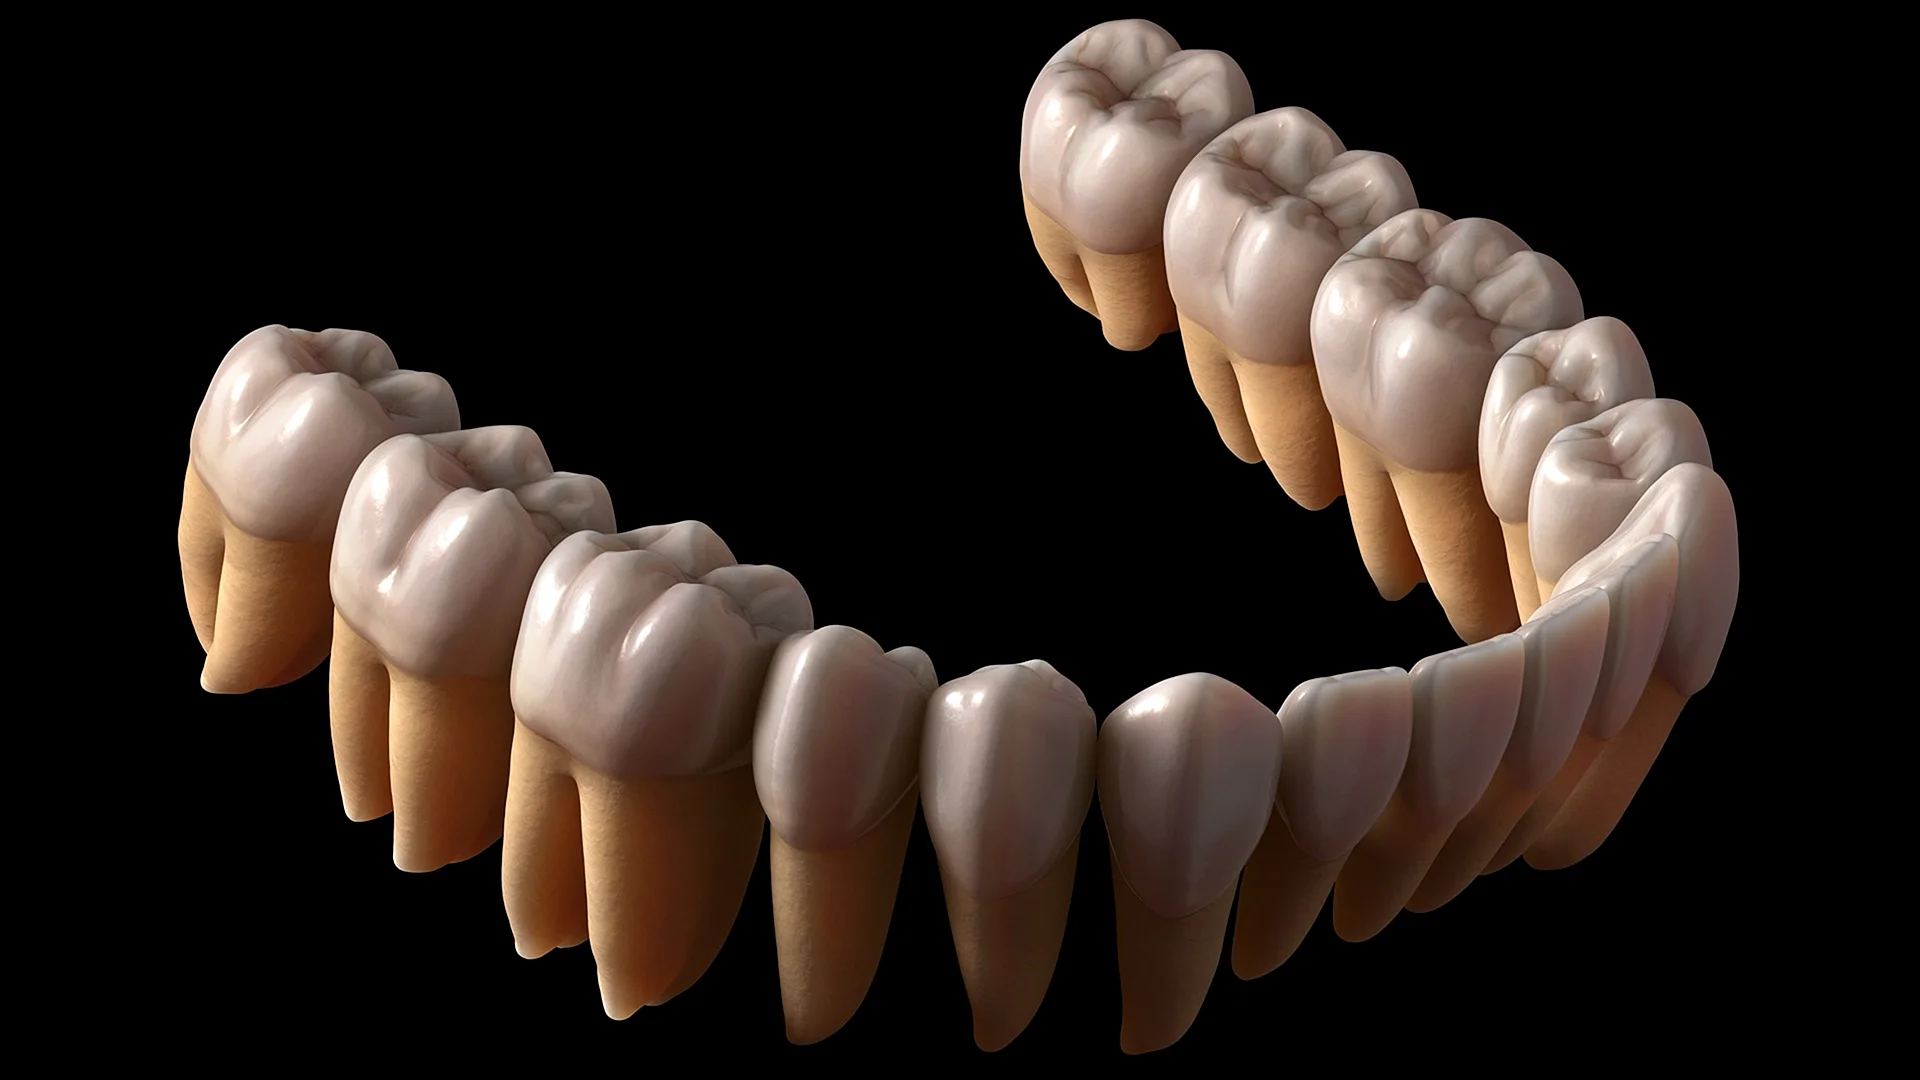 Zbrush Tooth Wallpaper